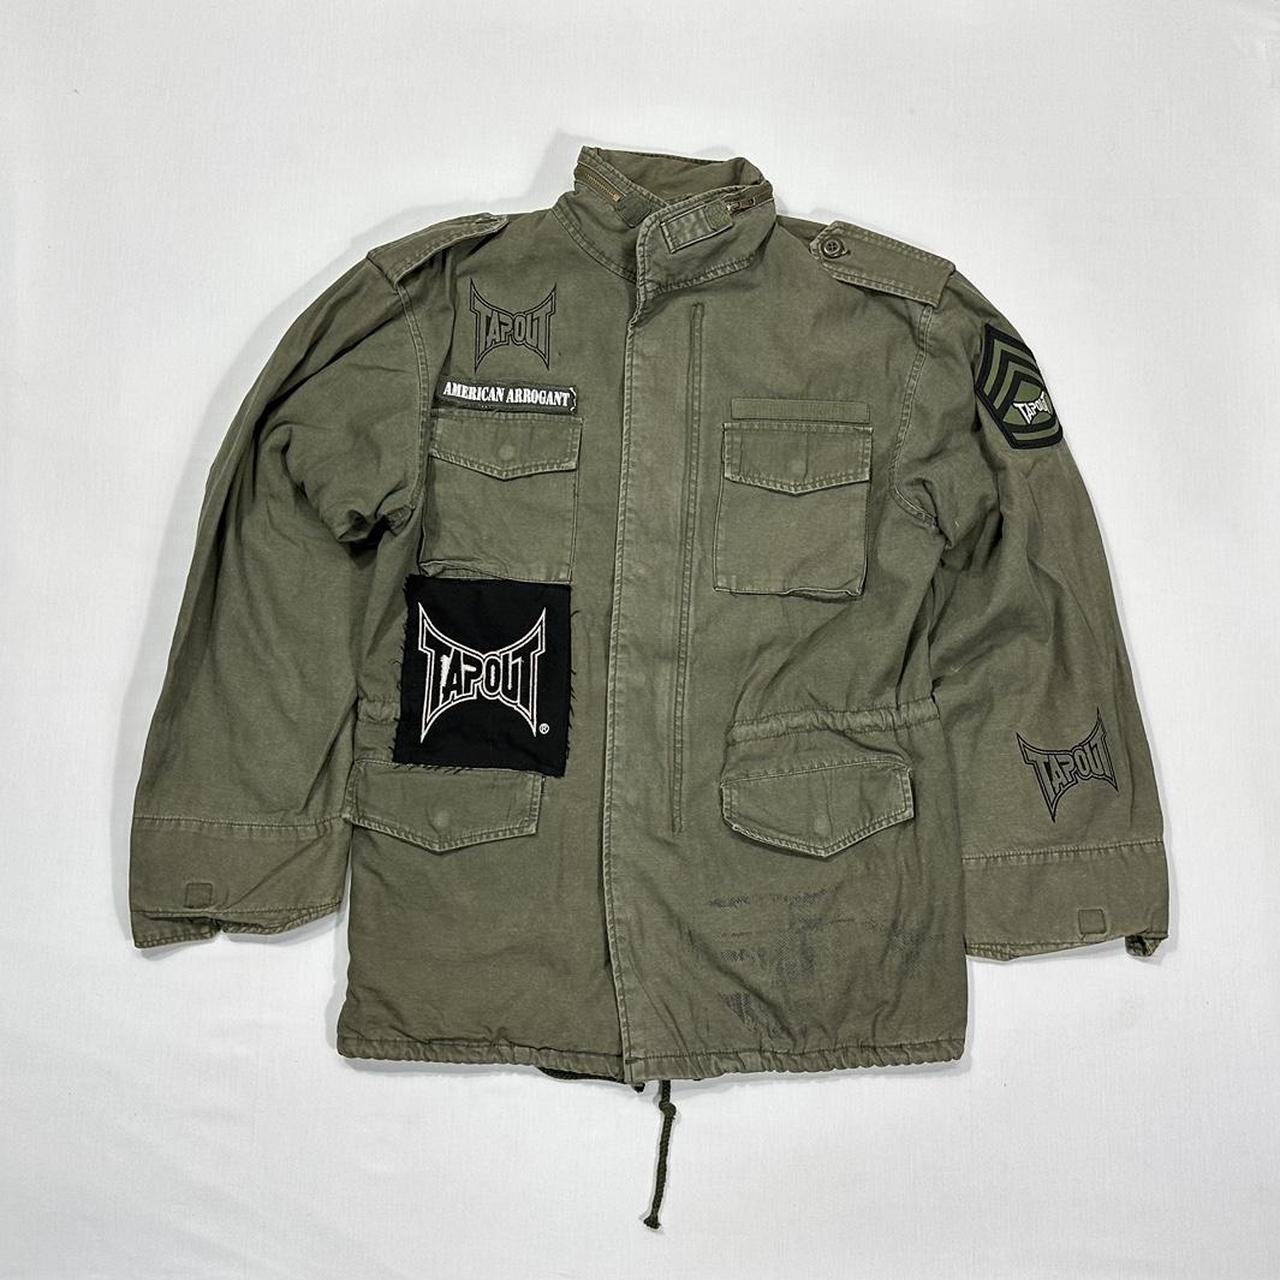 Tapout Jacket Cyber Y2K Tapout Grunge Indie Mall... - Depop